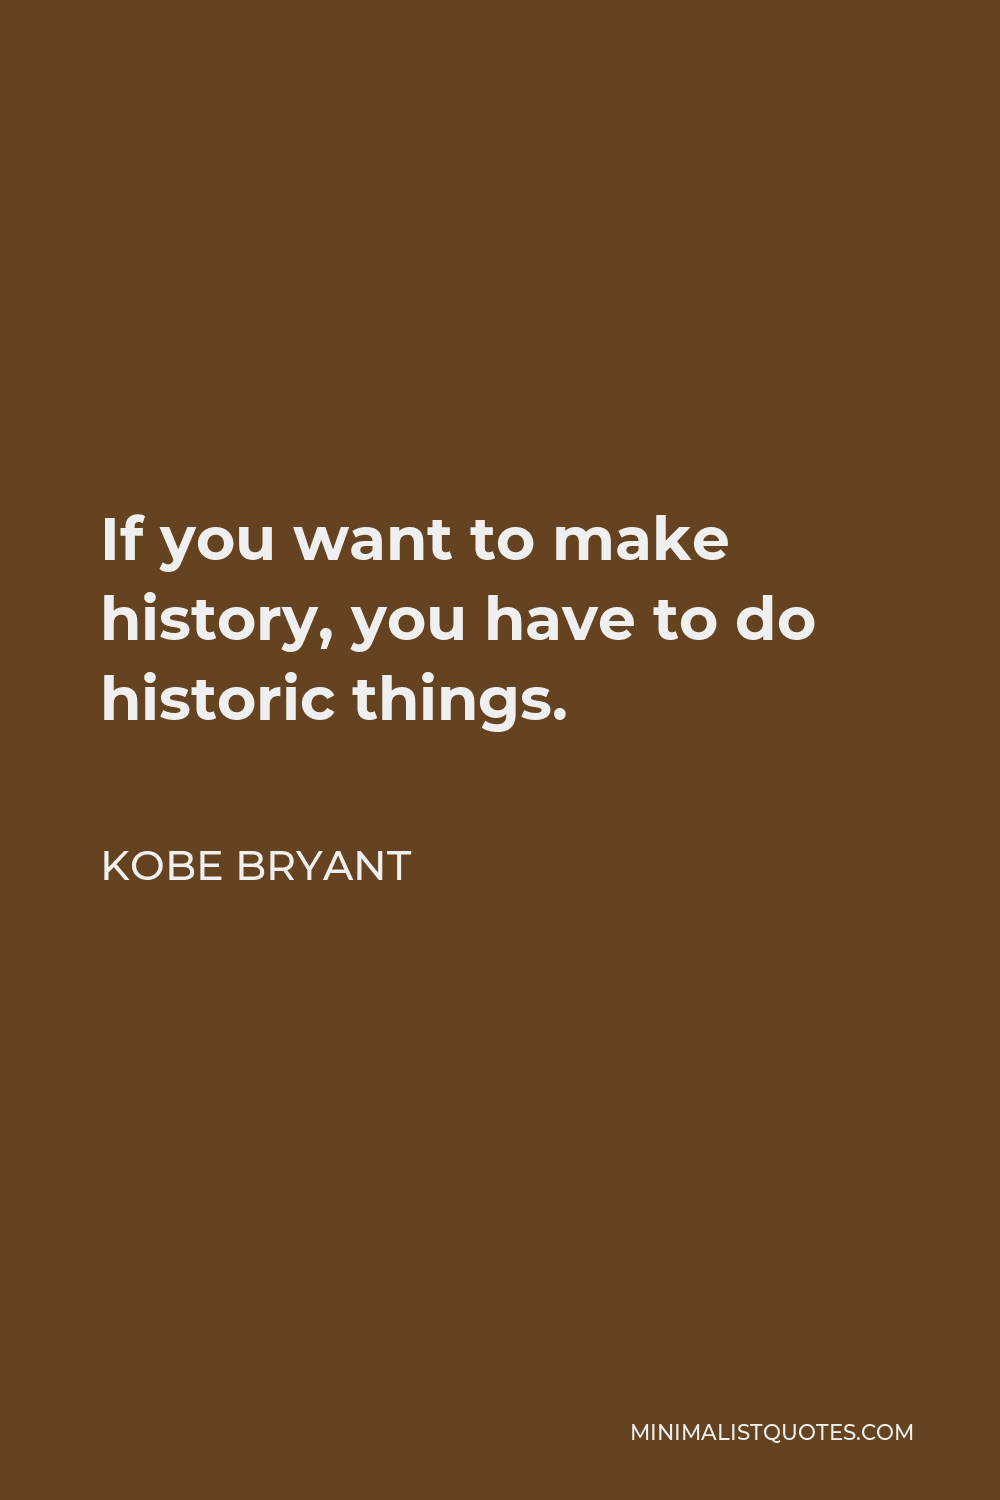 Kobe Bryant Quote - If you want to make history, you have to do historic things.